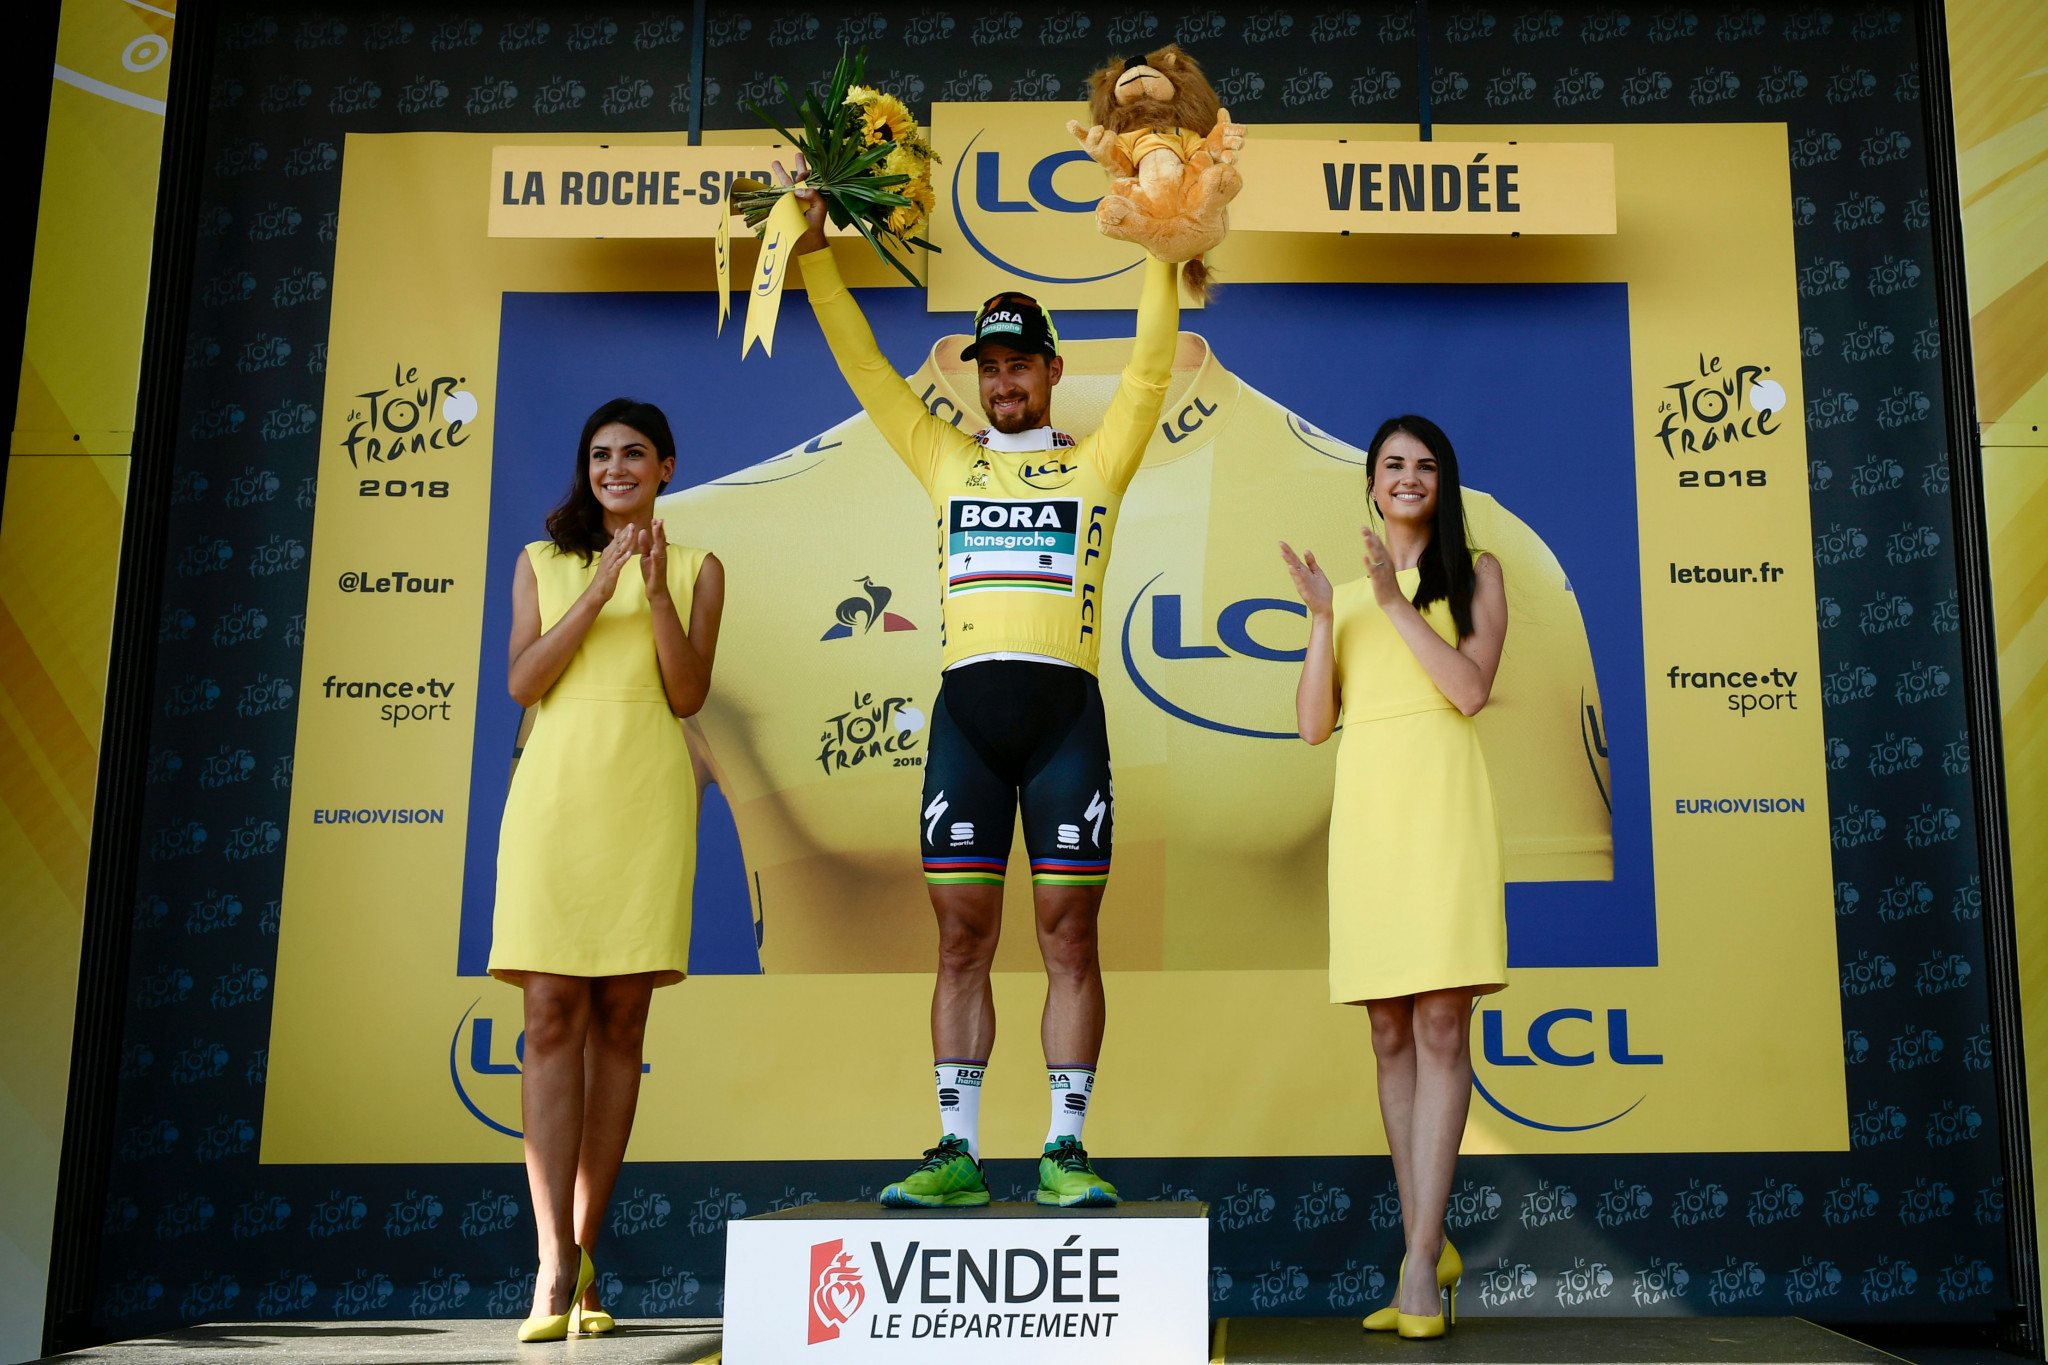 Slovakia's Peter Sagan claimed the yellow jersey with his 10th Tour de France stage win ©Getty Images